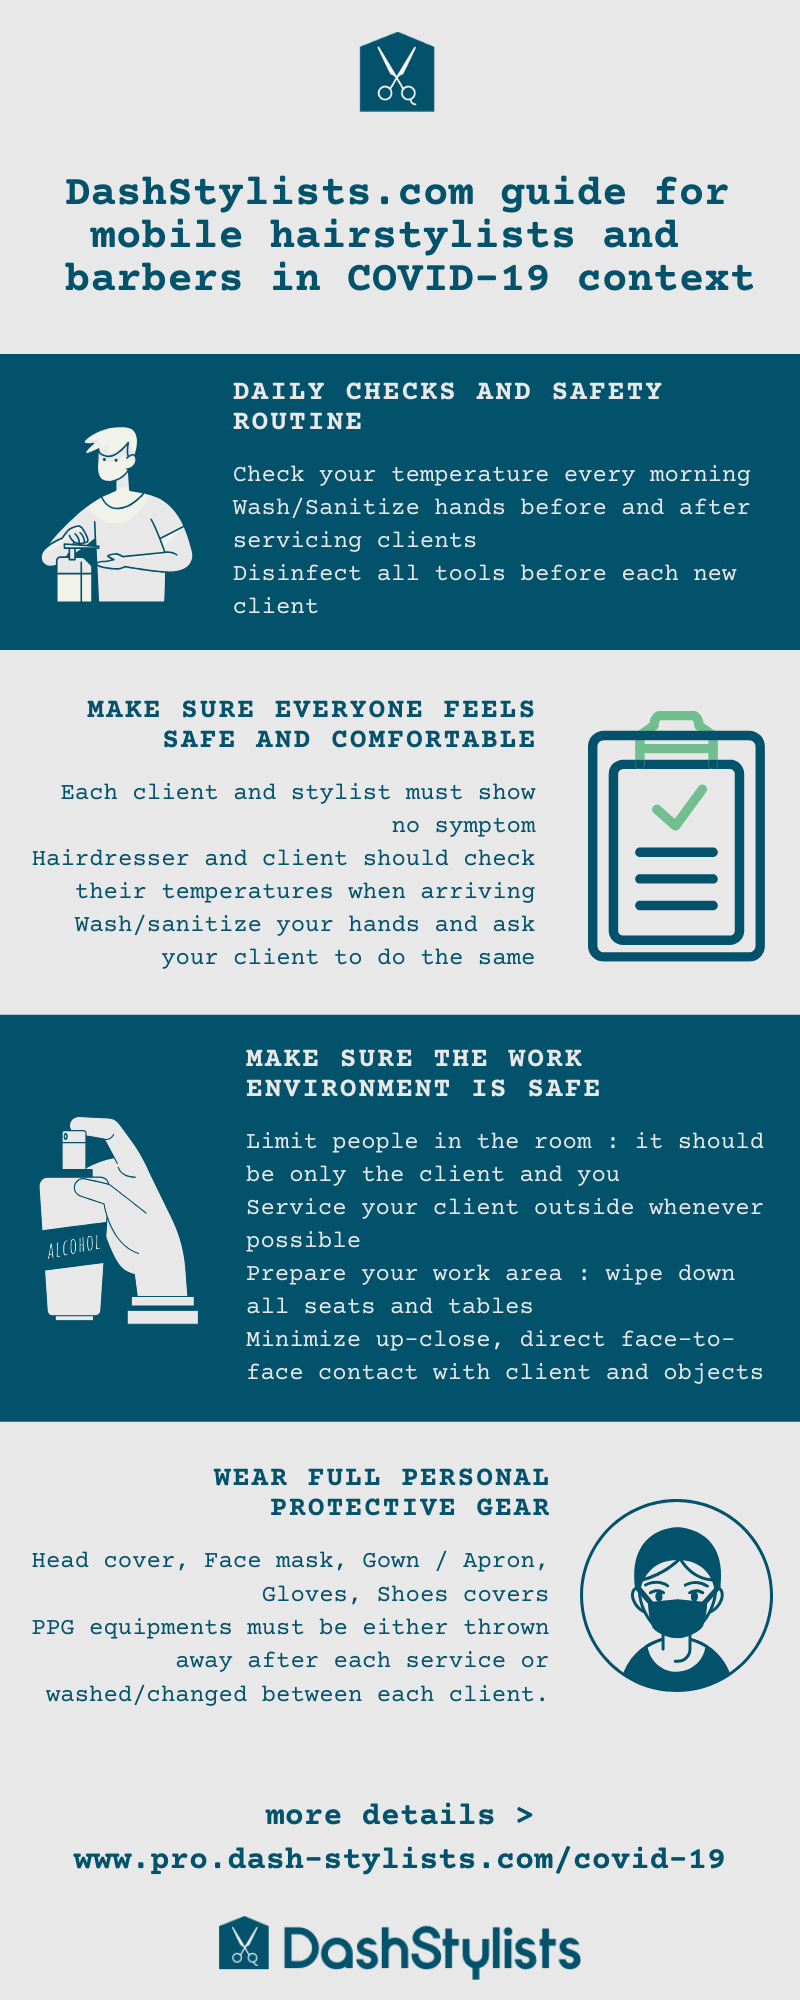 List of safety rules to have your hair cut and styles at your place